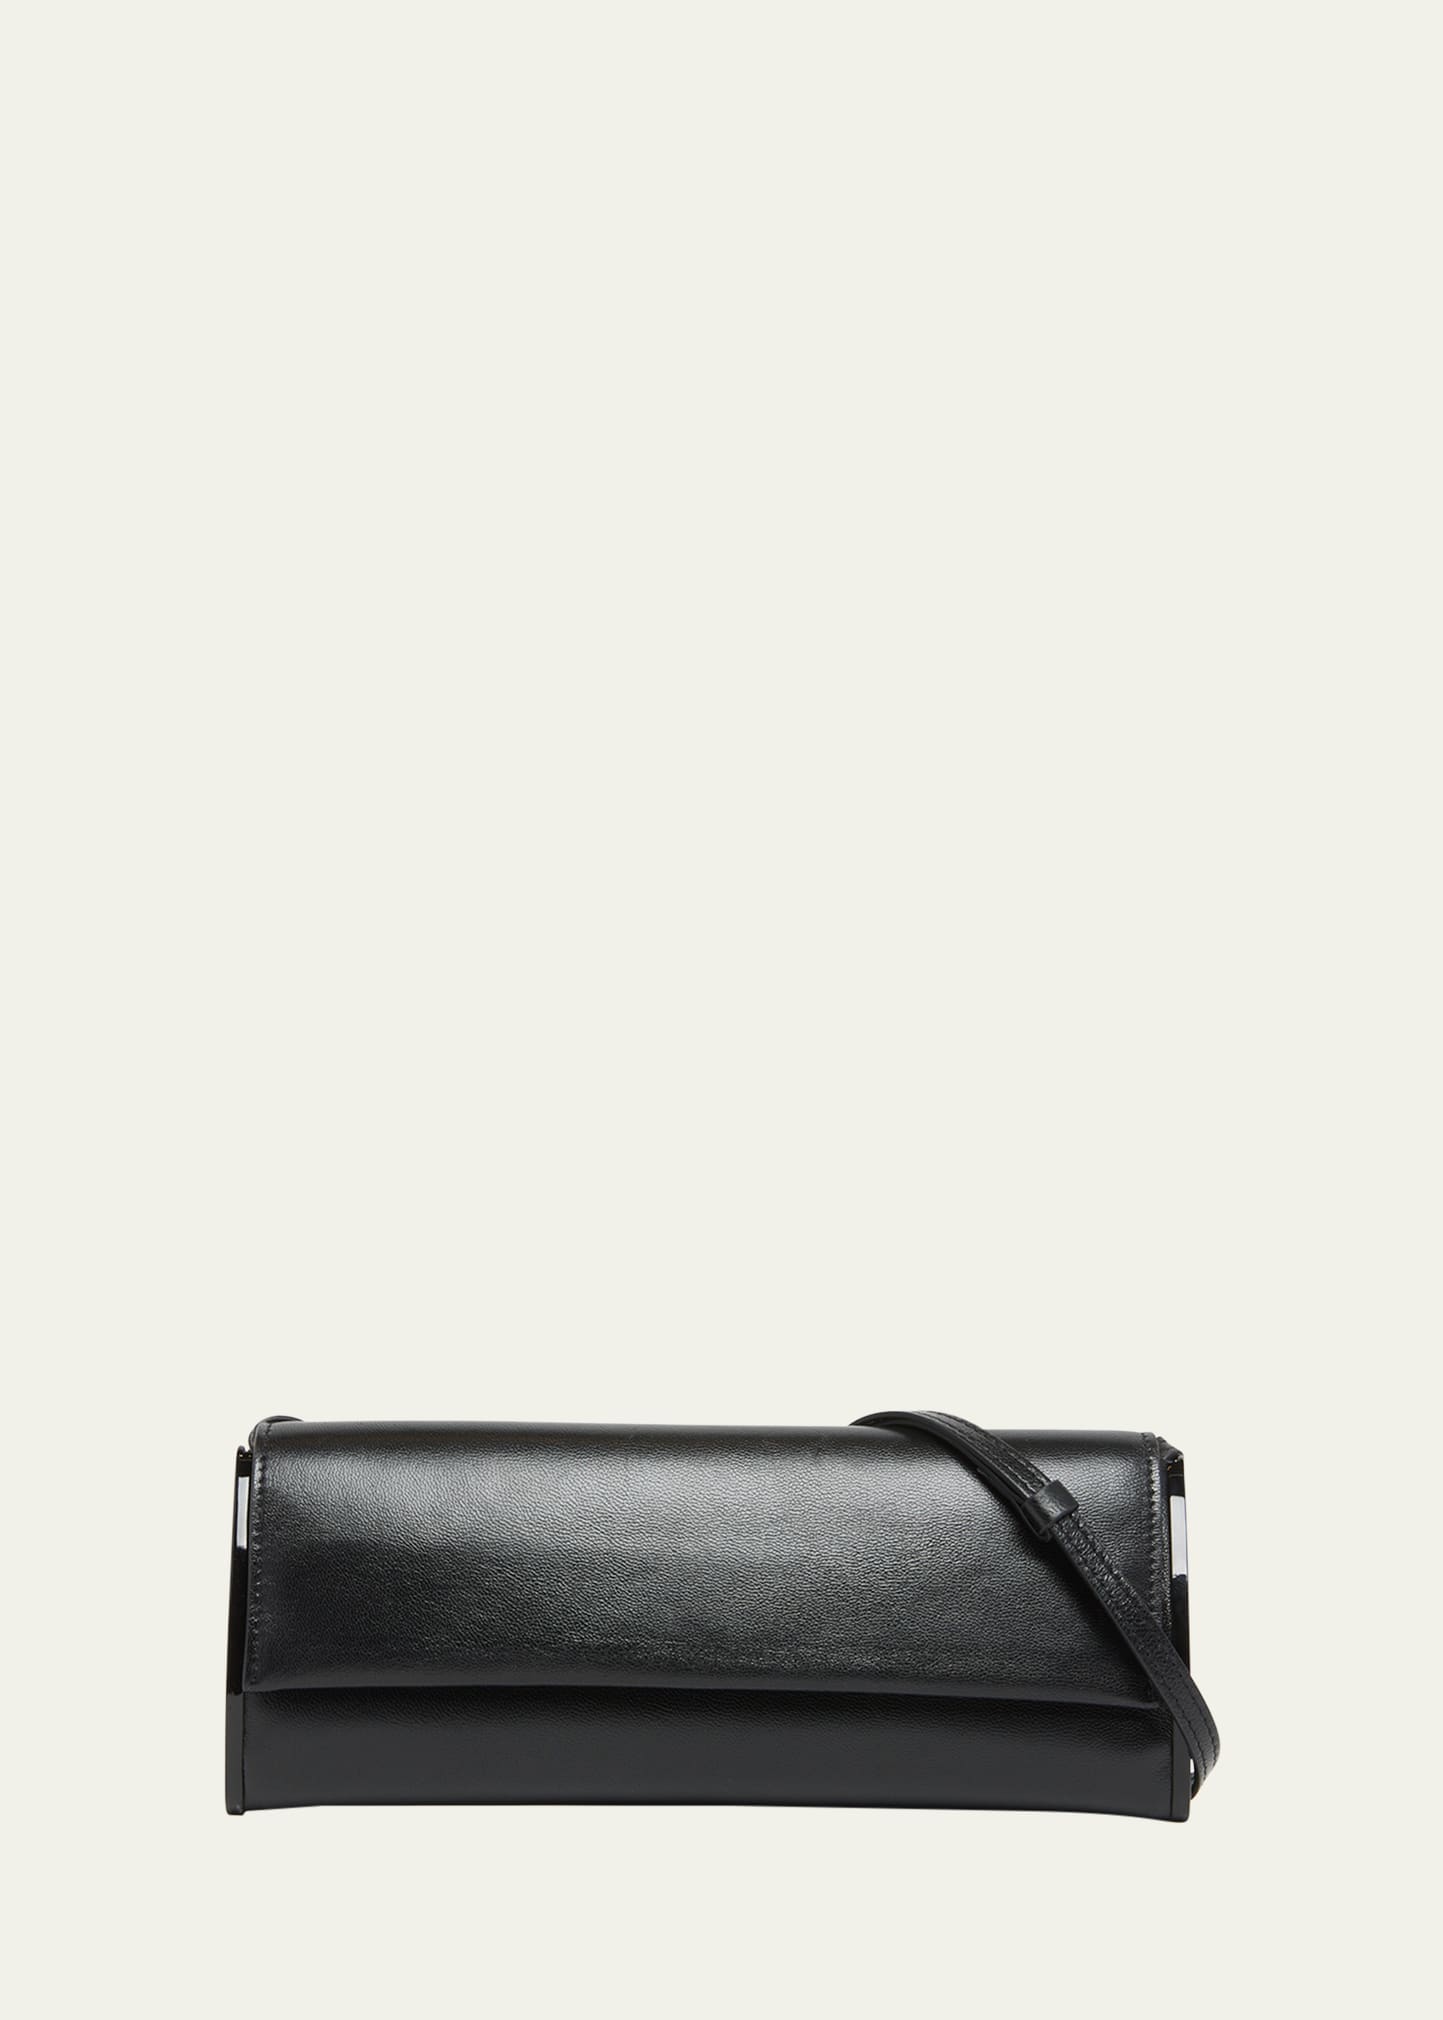 Shop Benedetta Bruzziches Kate Flap Leather Shoulder Bag In Nightly